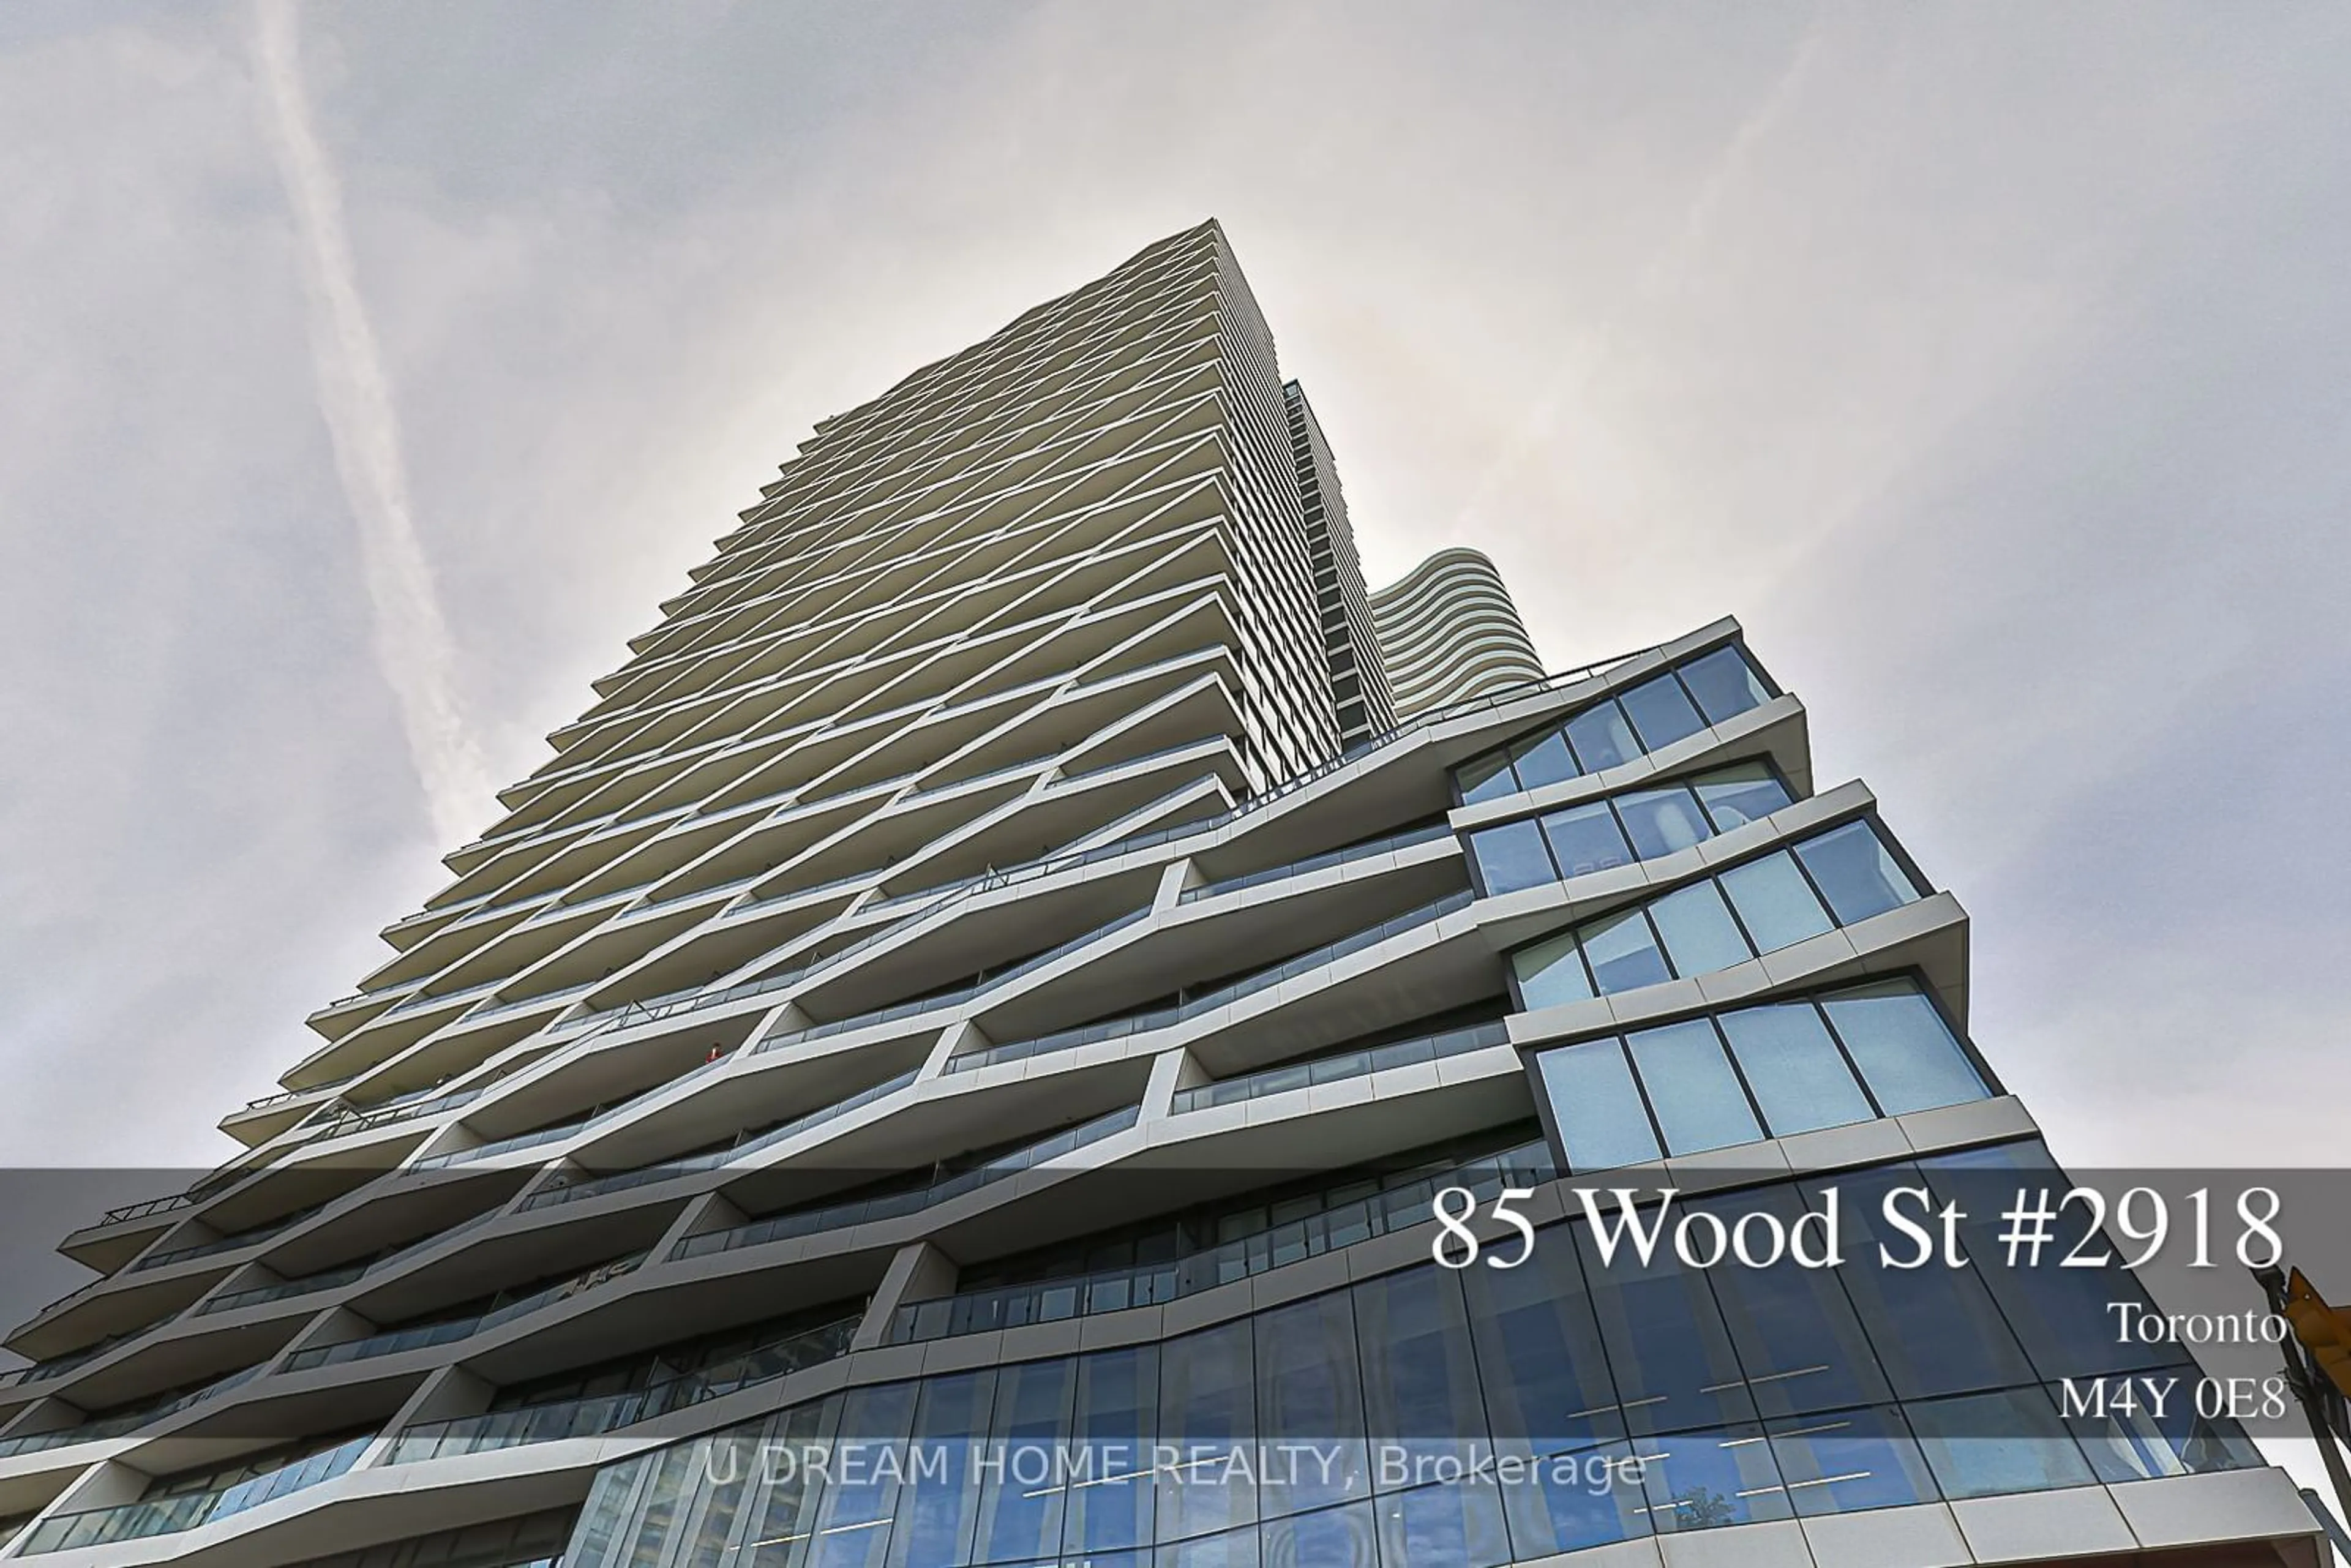 A pic from exterior of the house or condo for 85 Wood St #2918, Toronto Ontario M4Y 0E8